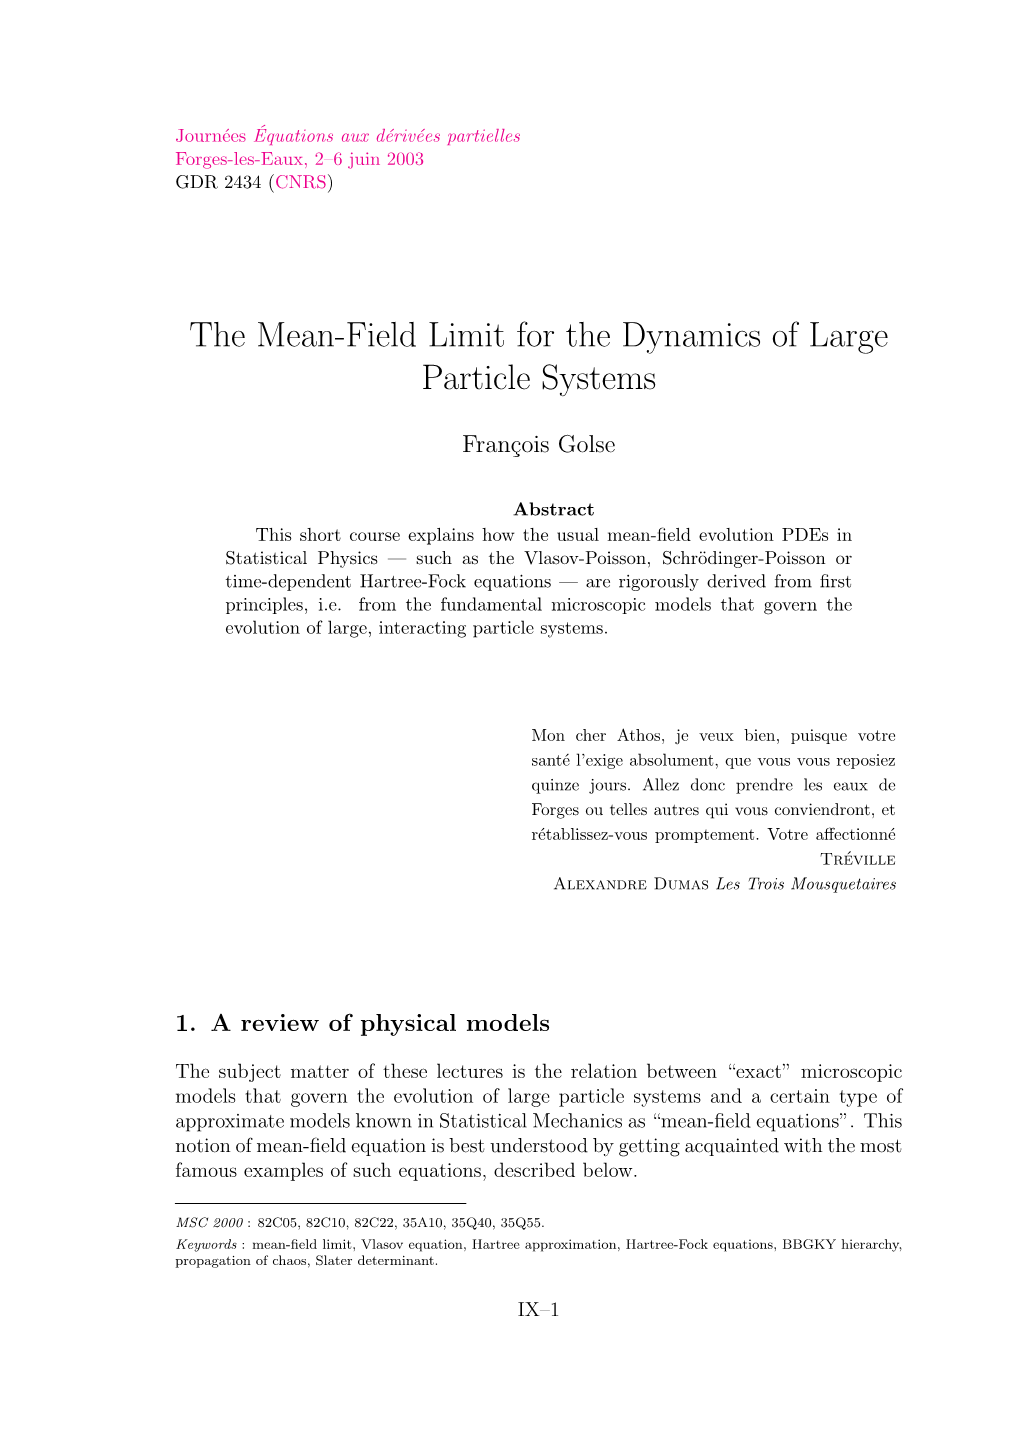 The Mean-Field Limit for the Dynamics of Large Particle Systems